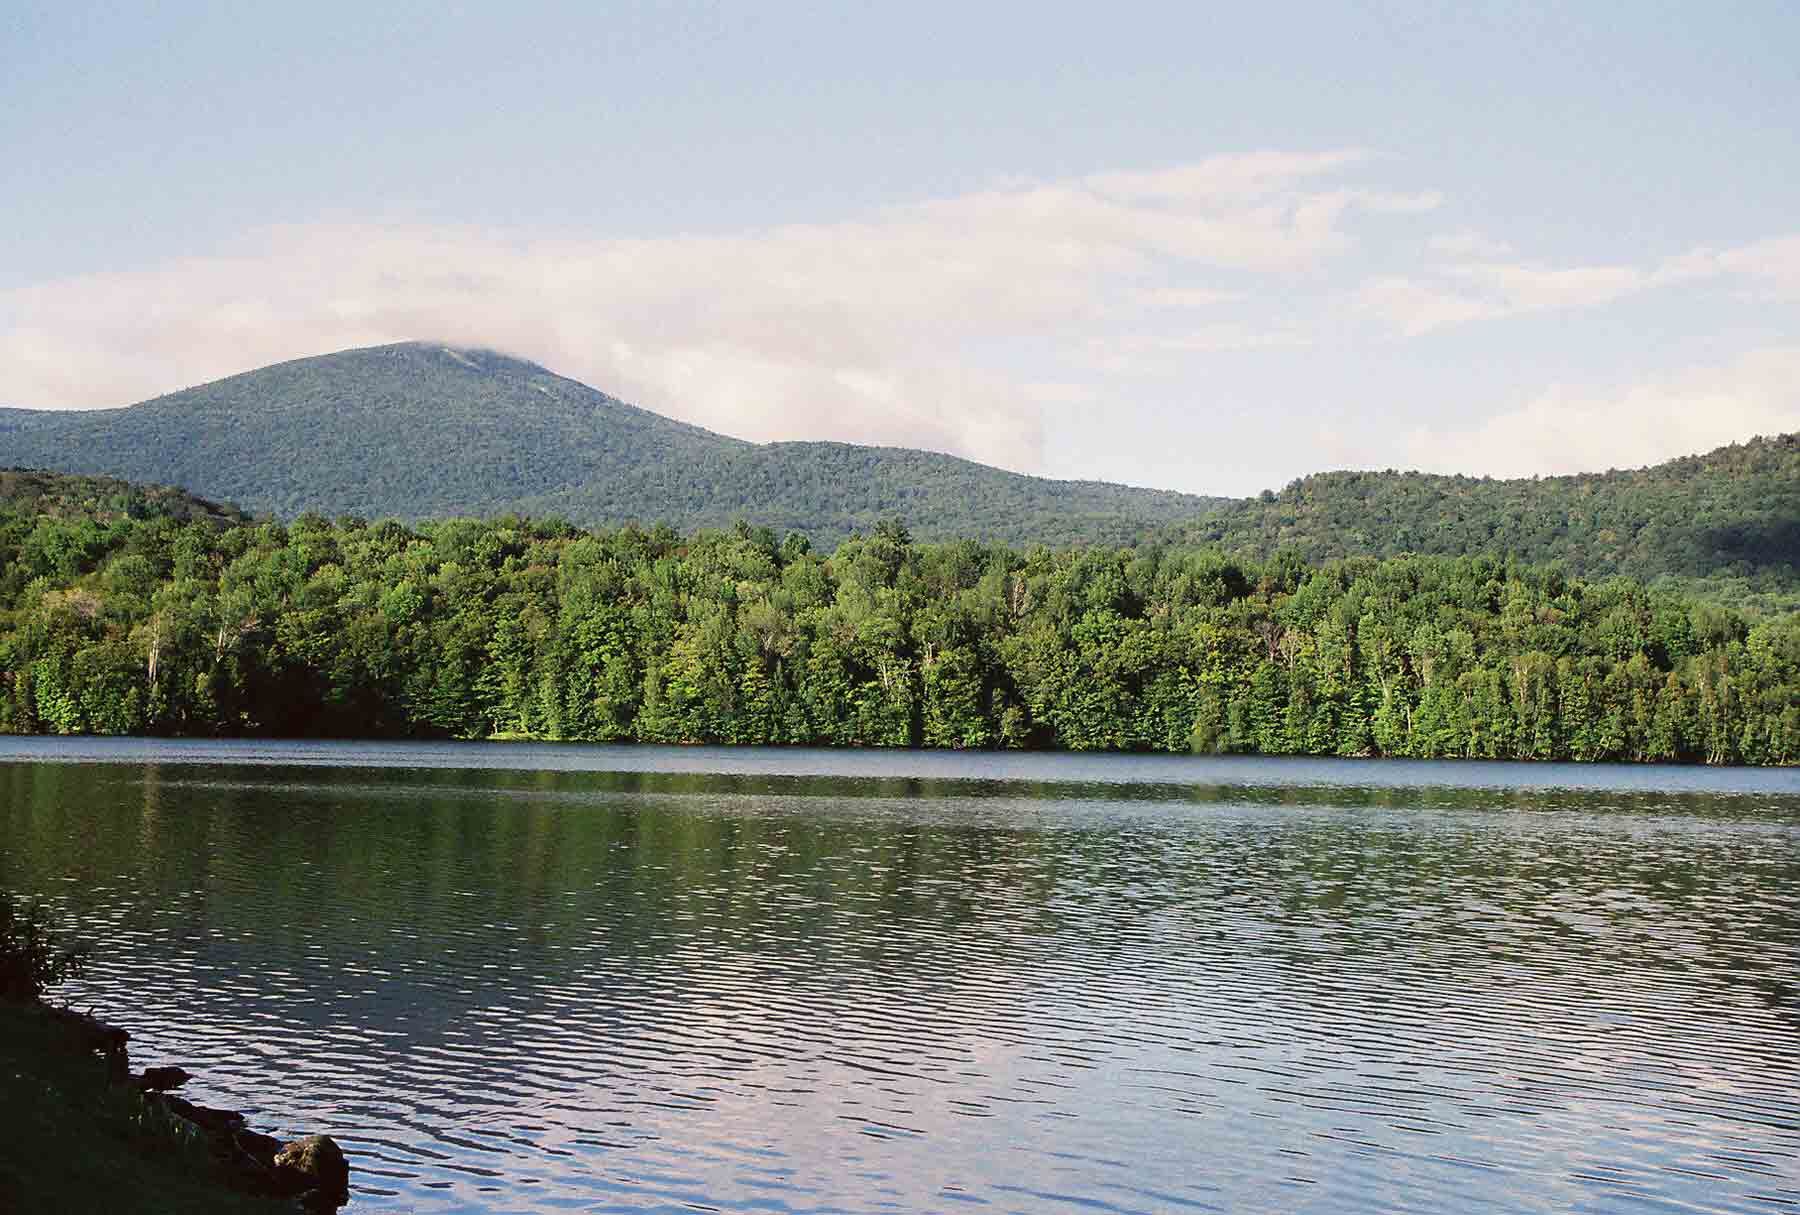 mm 19.7 - View from north side of Kent Pond. The AT runs along the south shore. The peak in background in Pico Peak.  Courtesy dlcul@conncoll.edu